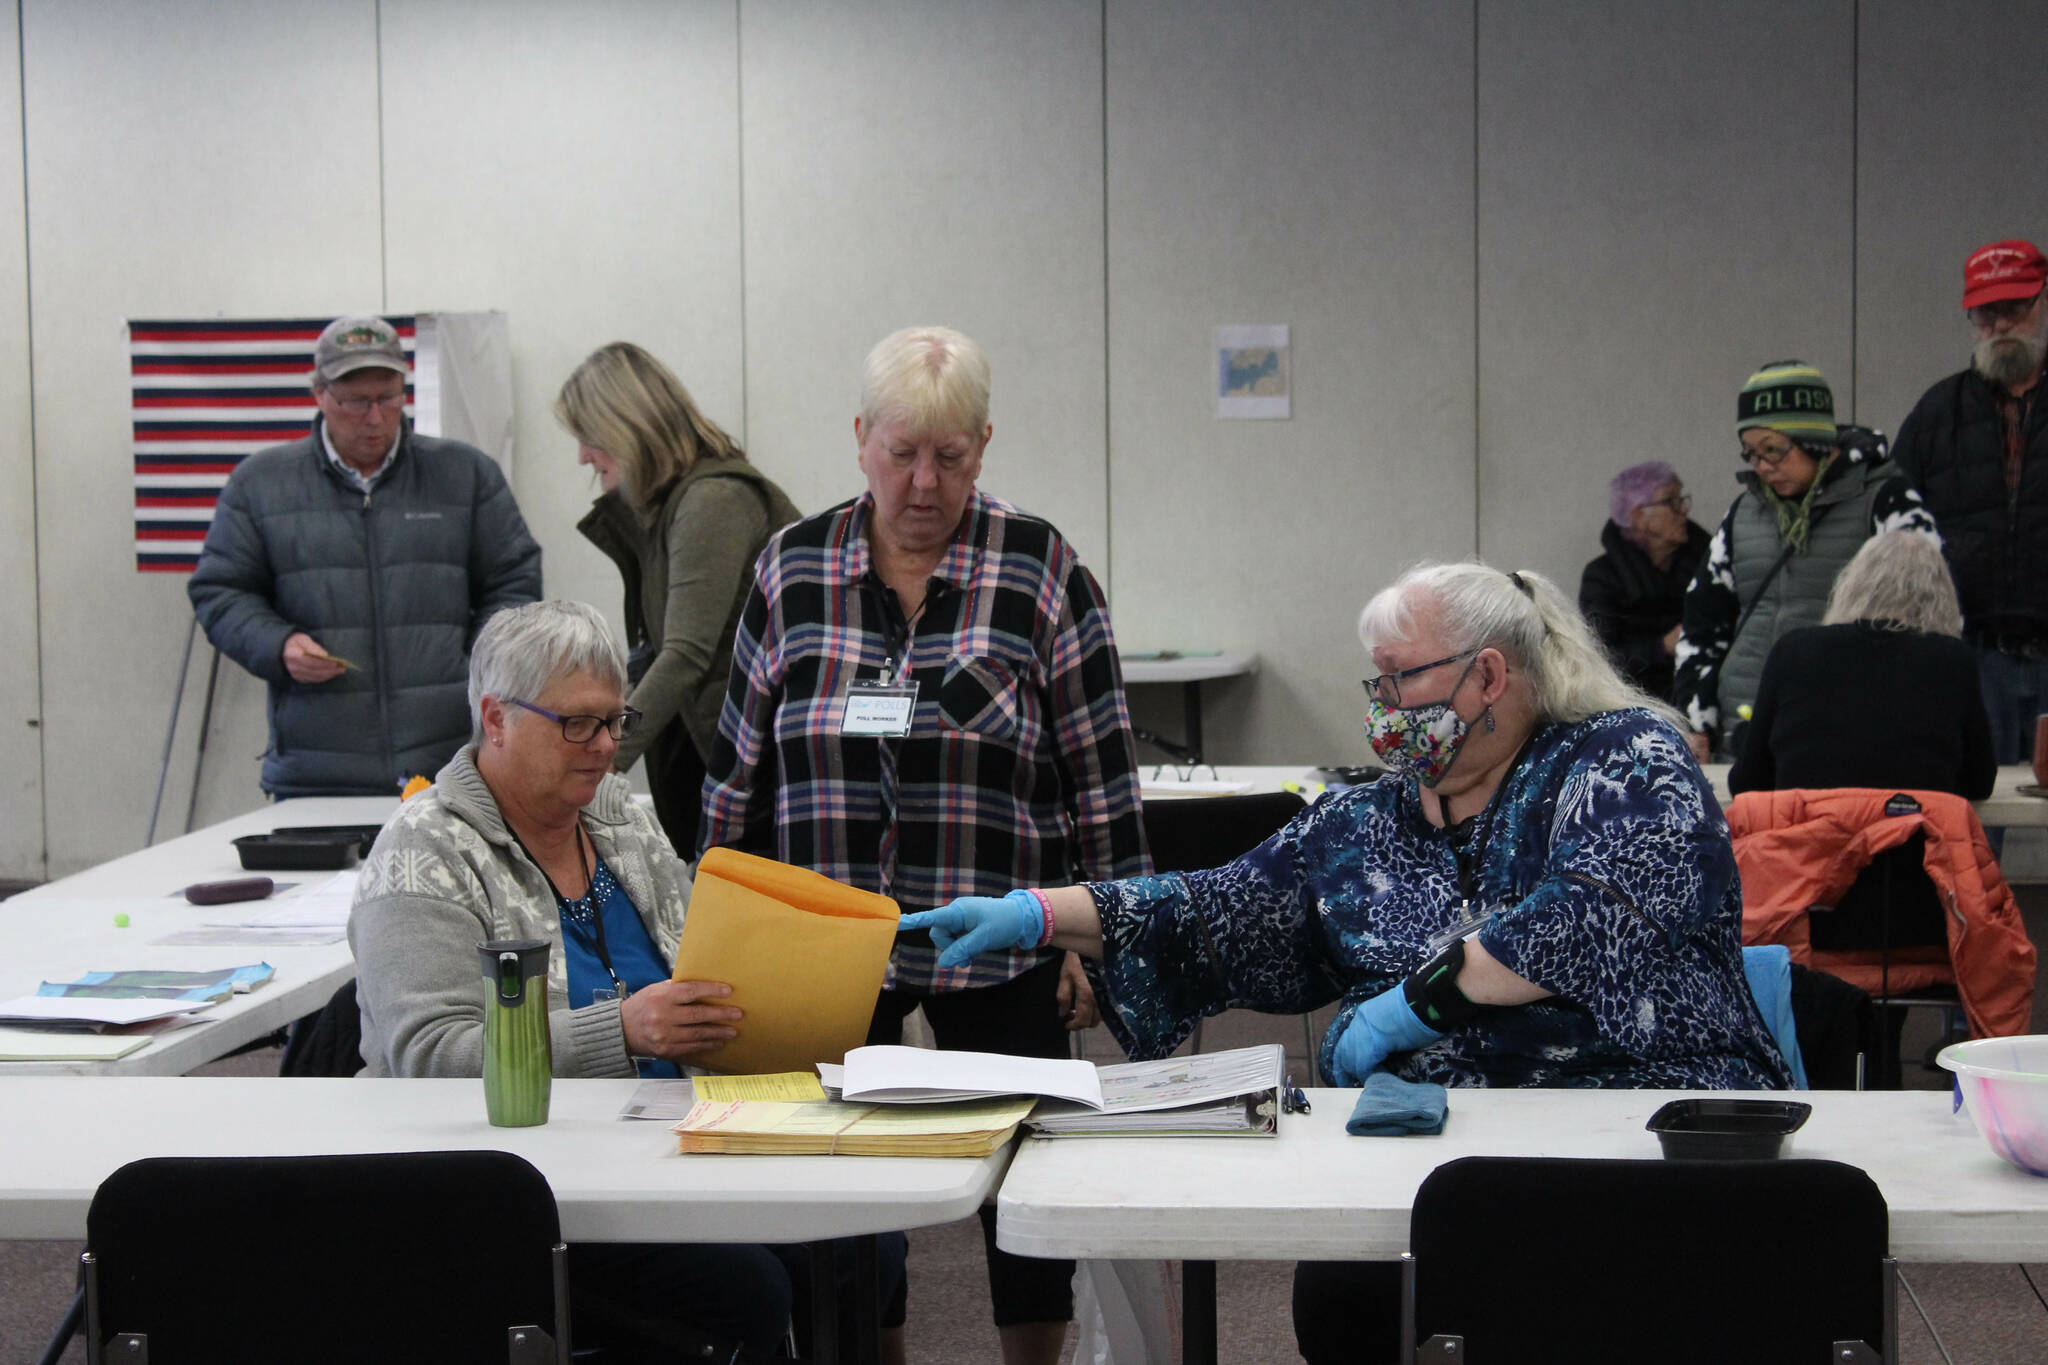 K-Beach Precinct Chair Kathy Carson (right) assists Carol Louthan (left) with a folder of spoiled ballots at the Soldotna Regional Sports Complex on Tuesday, Nov. 8, 2022 in Soldotna, Alaska. (Ashlyn O'Hara/Peninsula Clarion)